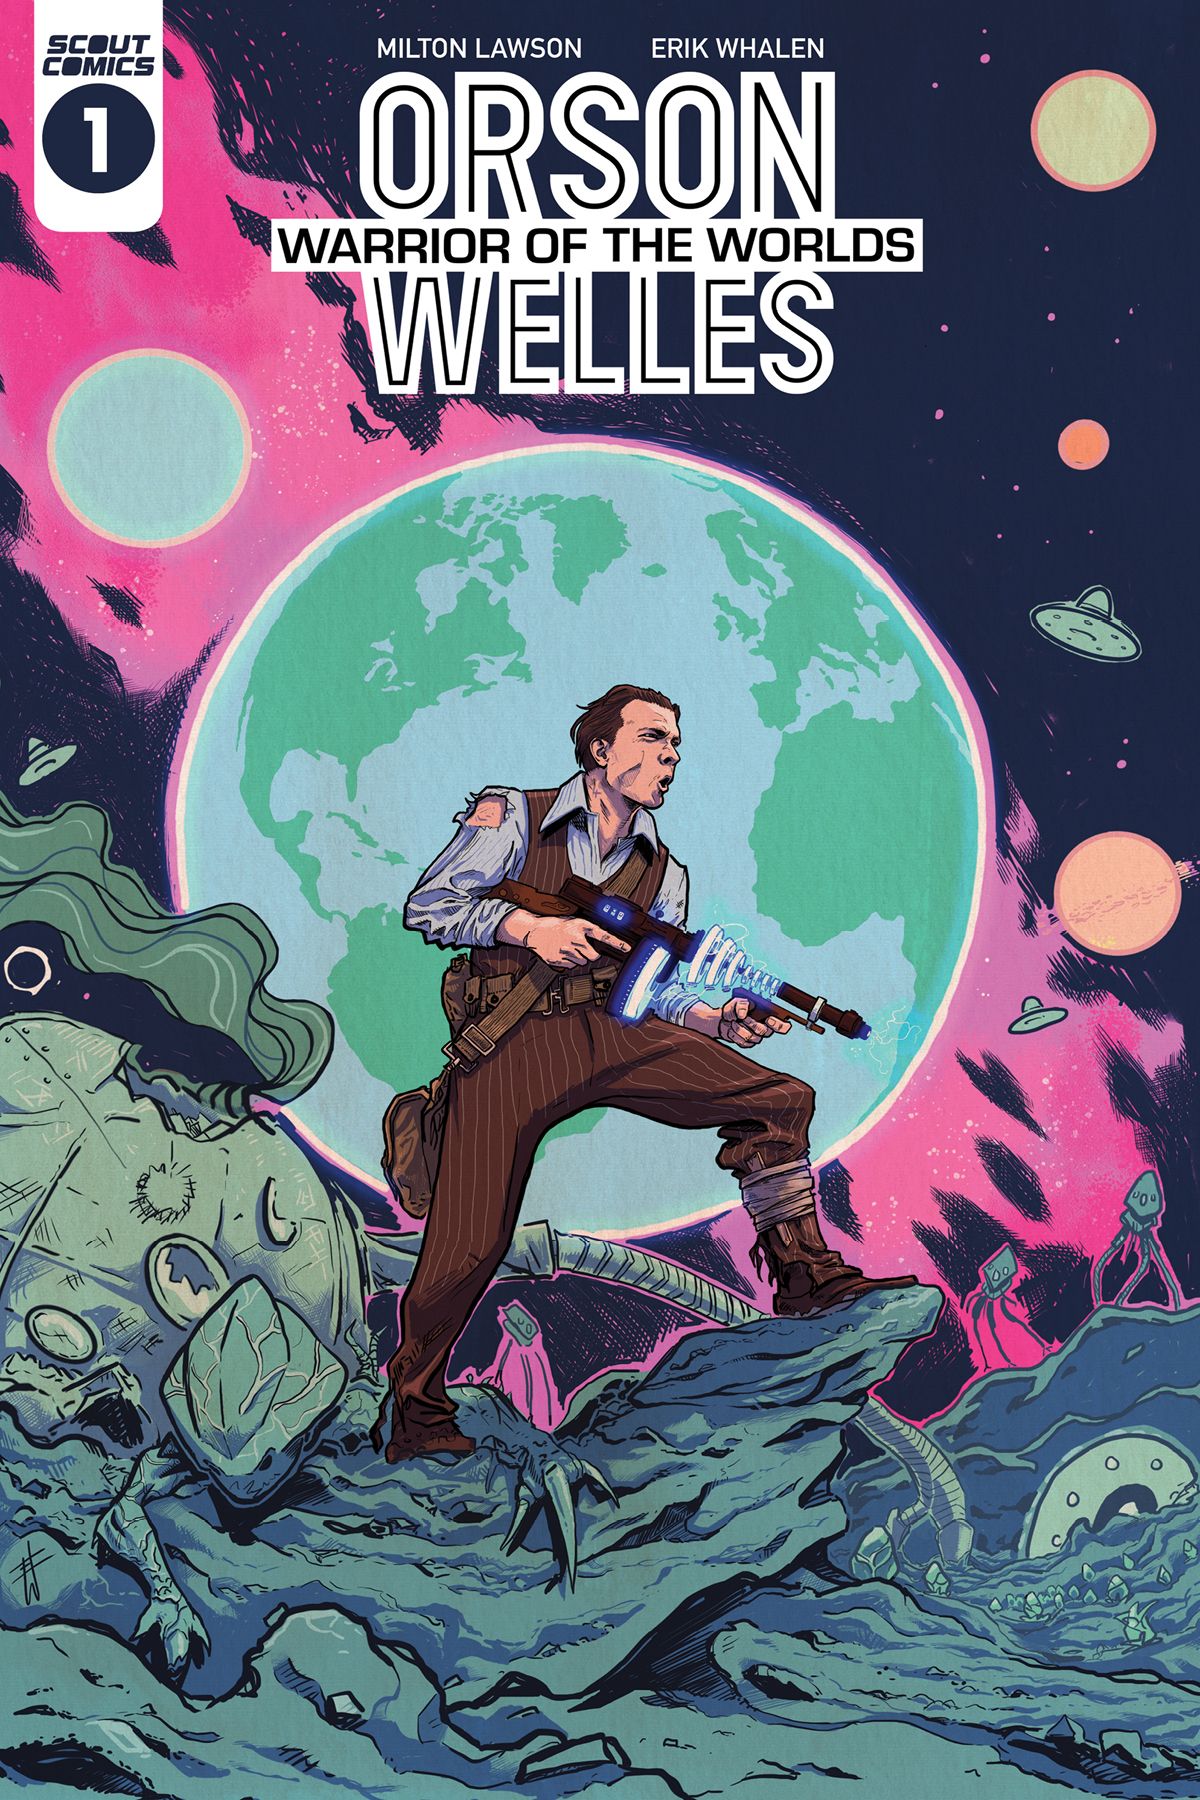 Orson Welles: Warrior of the Worlds Comic